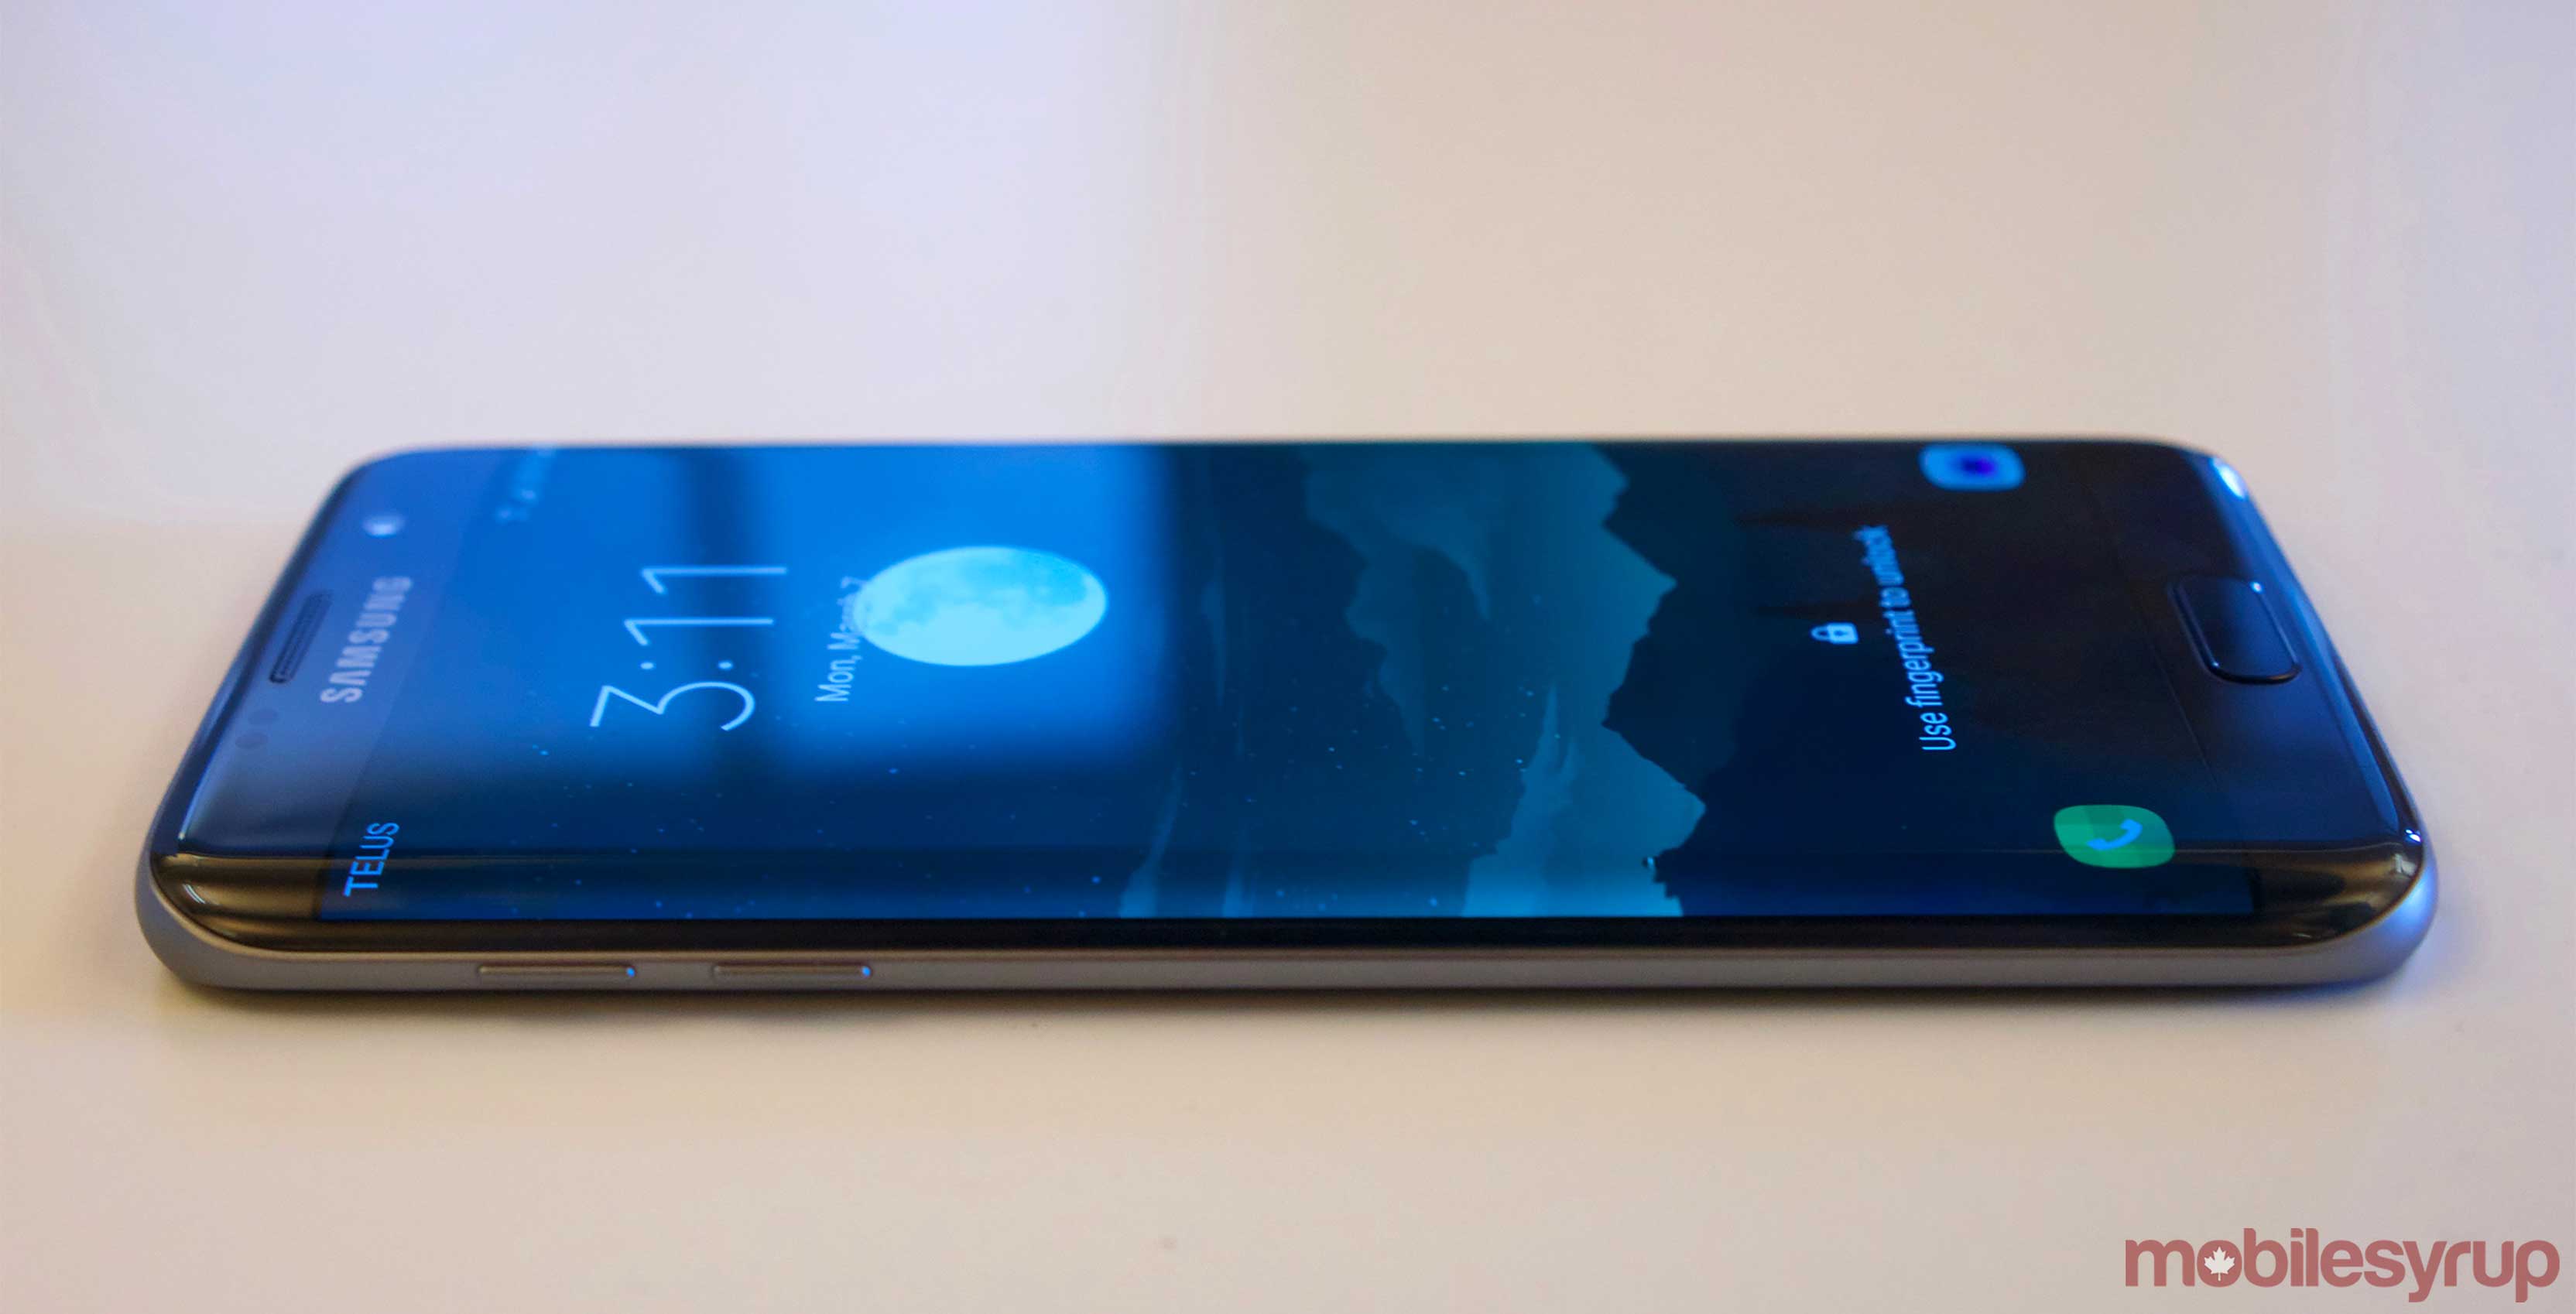 side view of Galaxy S7 edge